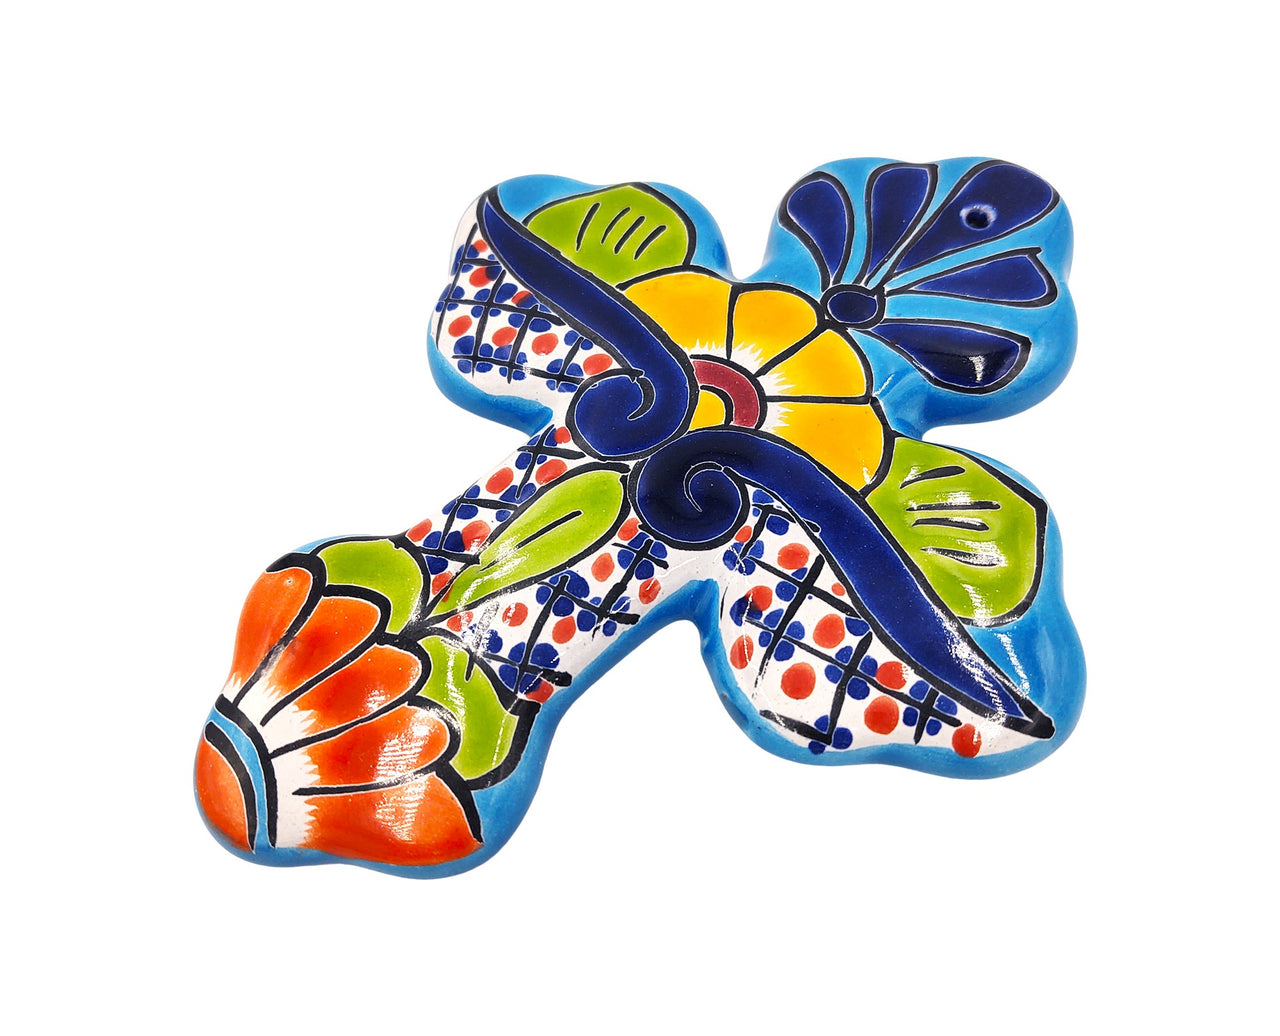 Mexican Talavera Wall Cross 8.5" - Hand Painted, Traditional Mexican Décor - Light Blue Trim